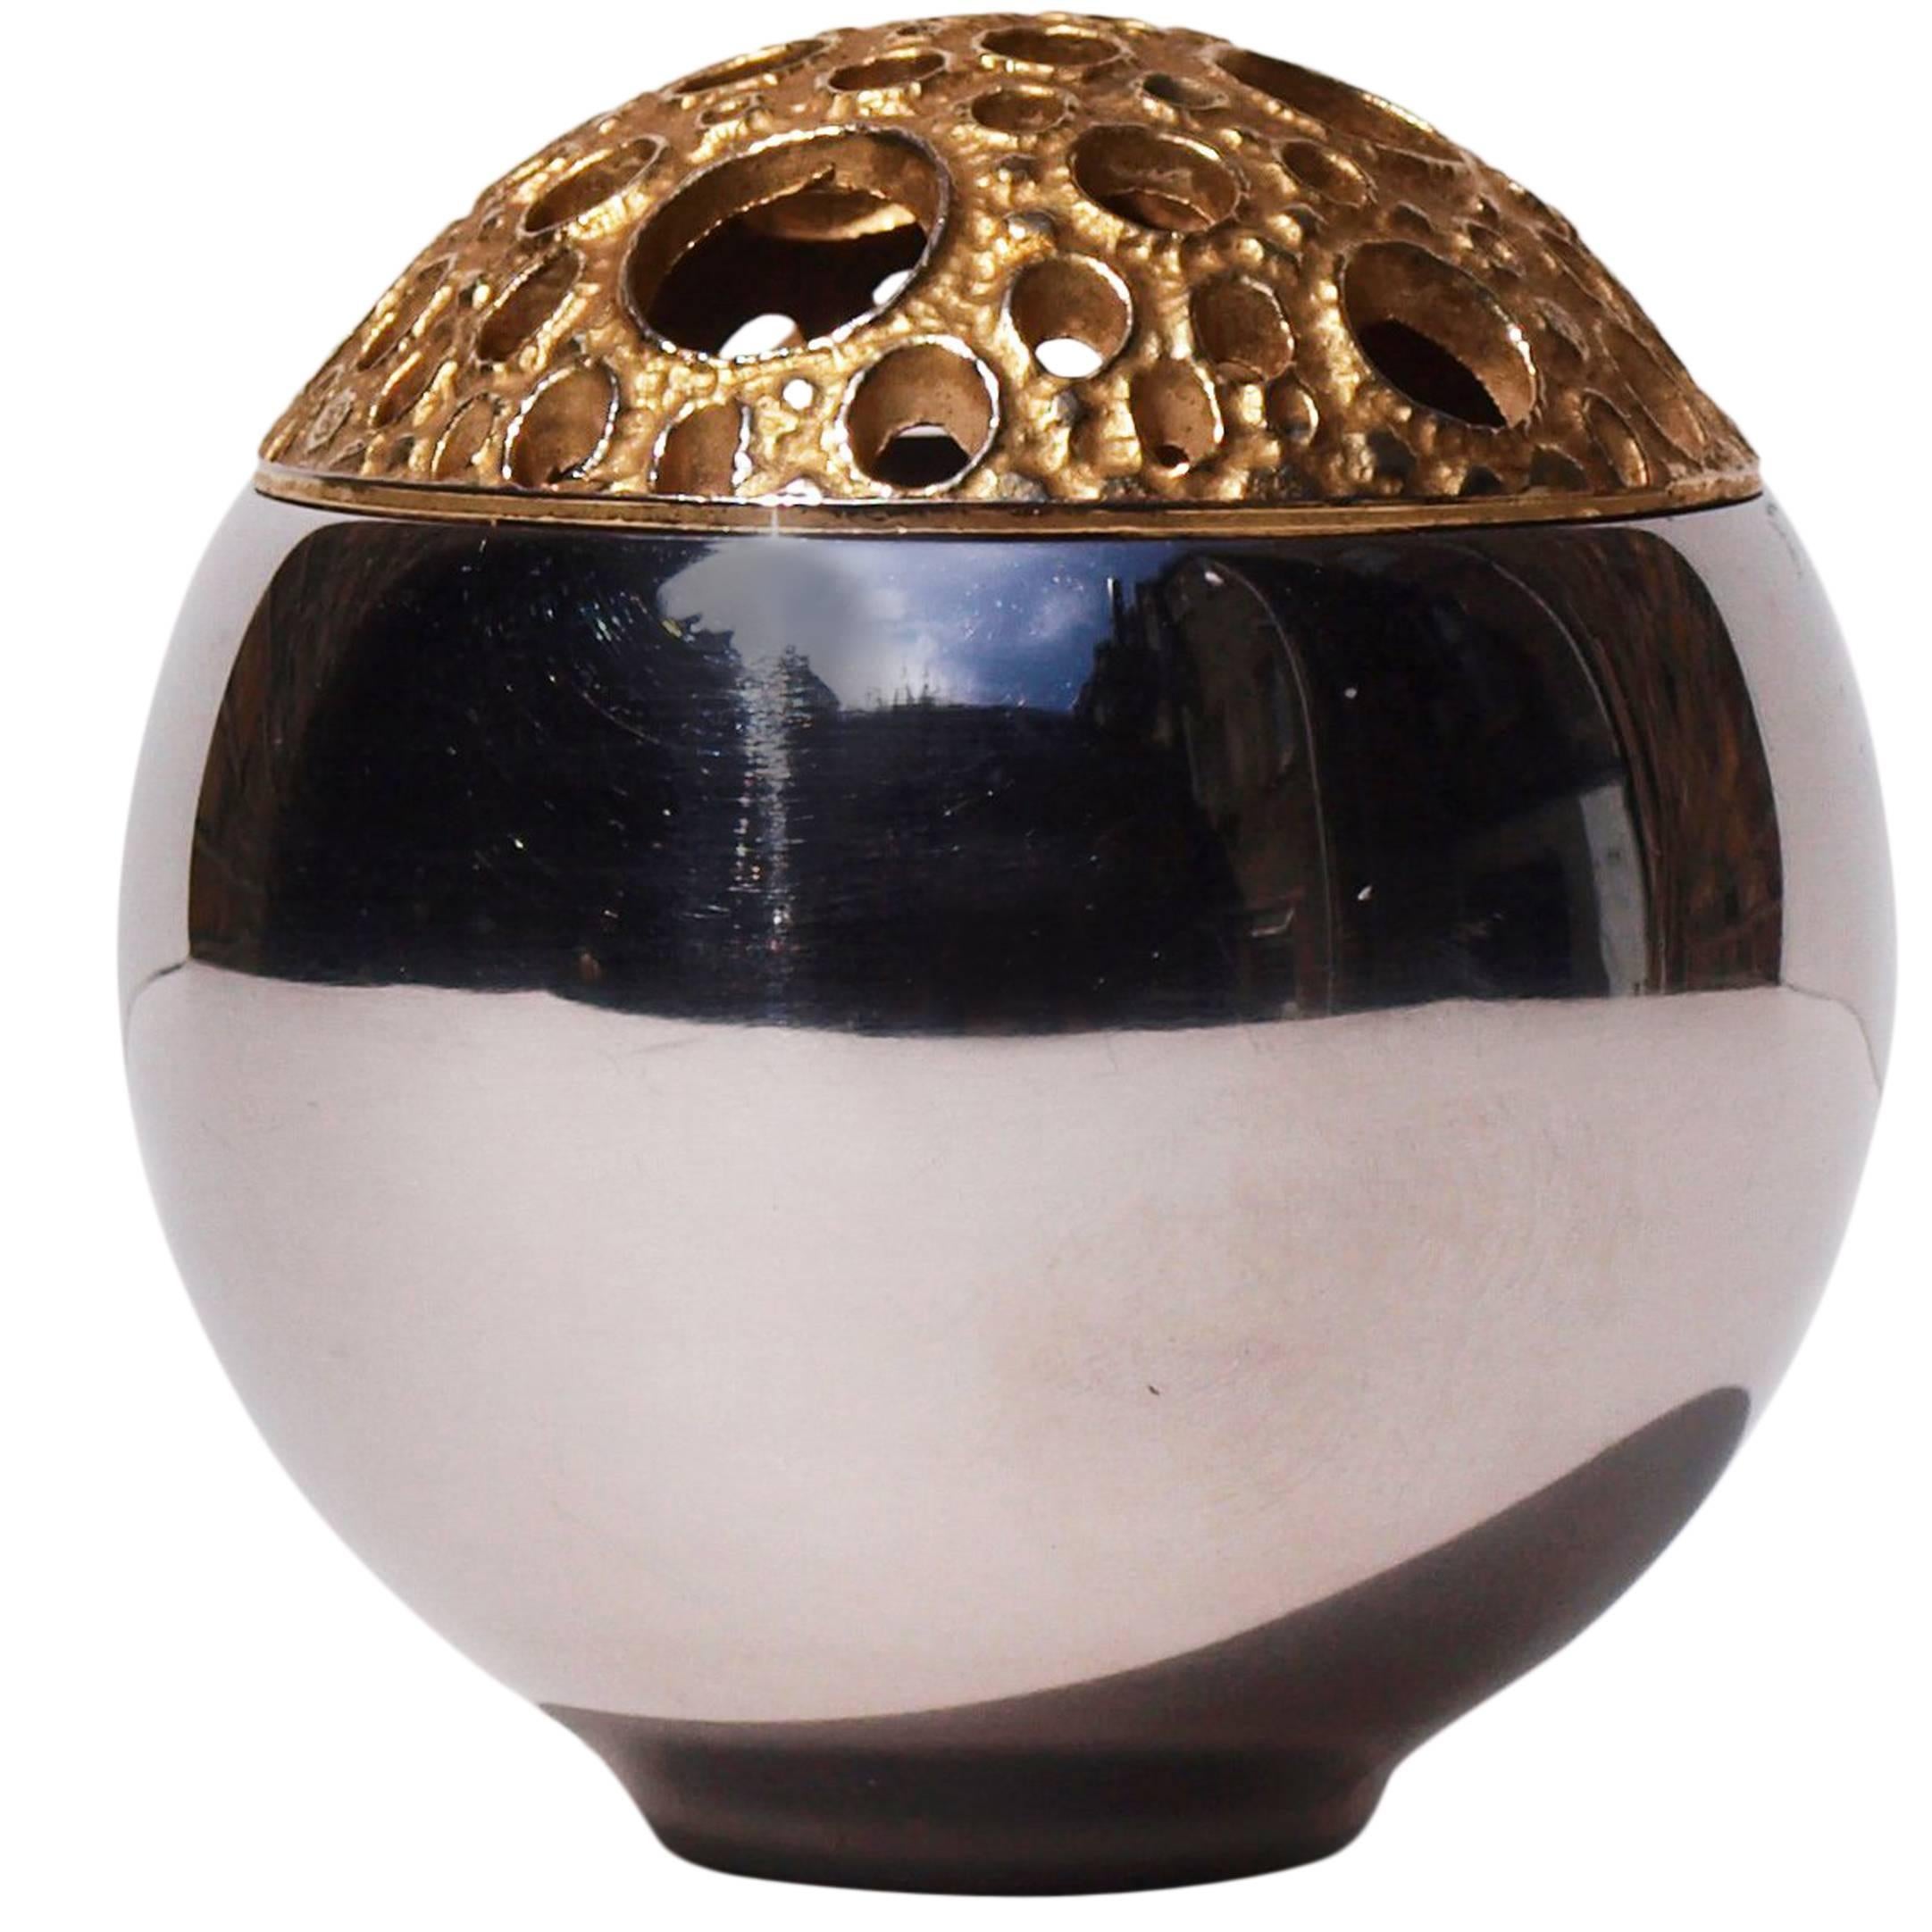 Stainless Steel and Gold Gilded Posey Vase, Stuart Devlin for Viners